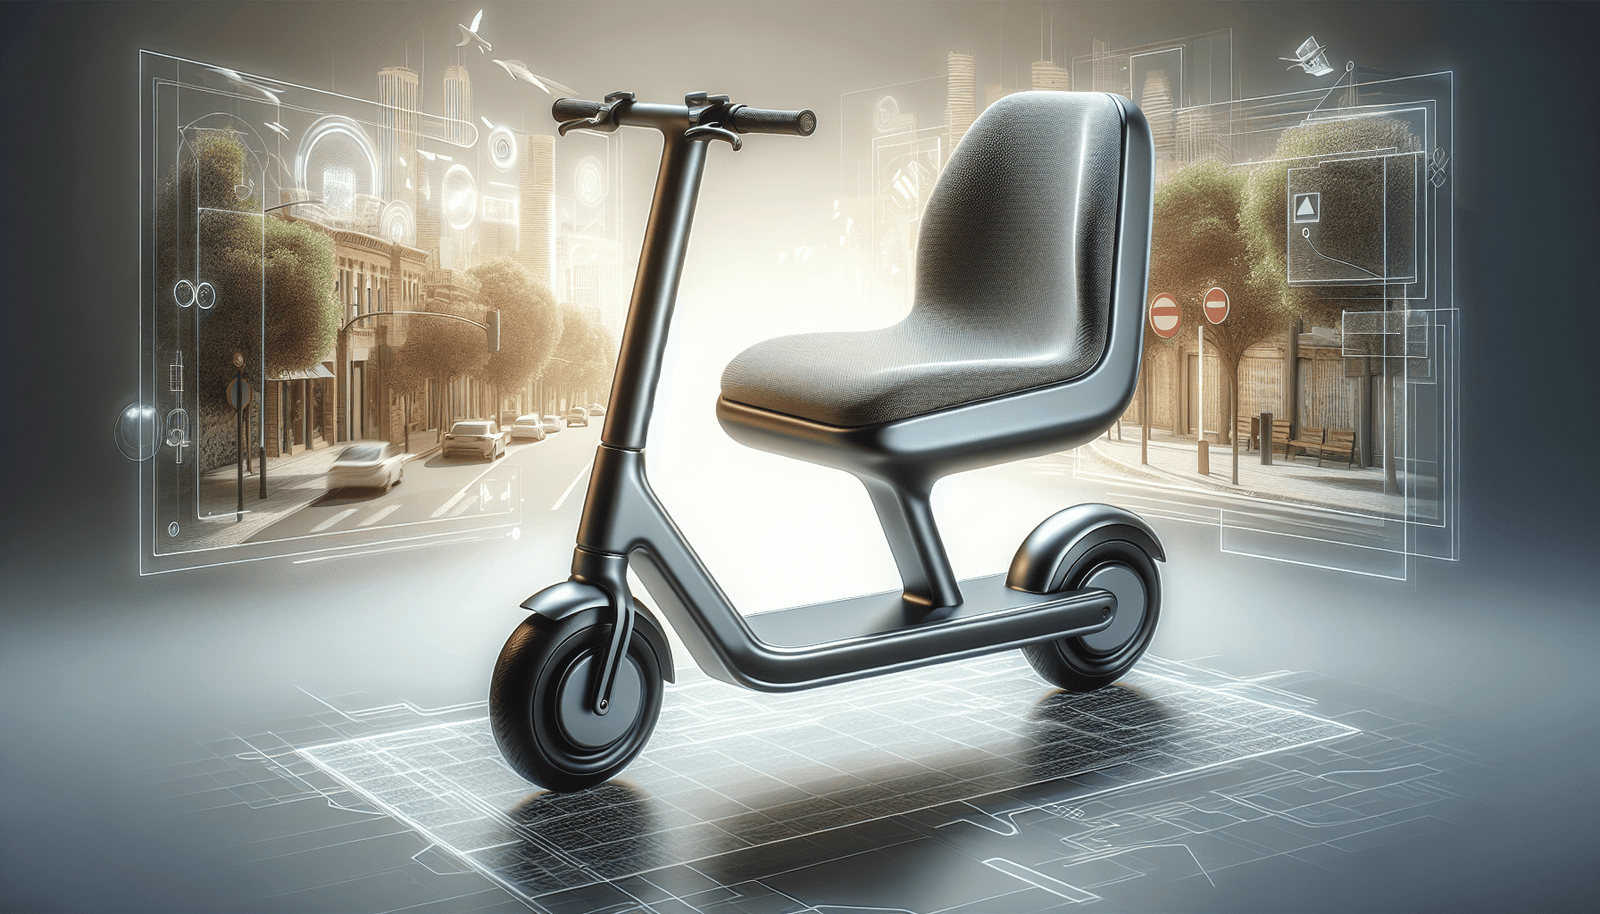 Can I Install A Seat On My Electric Scooter For A More Comfortable Ride?